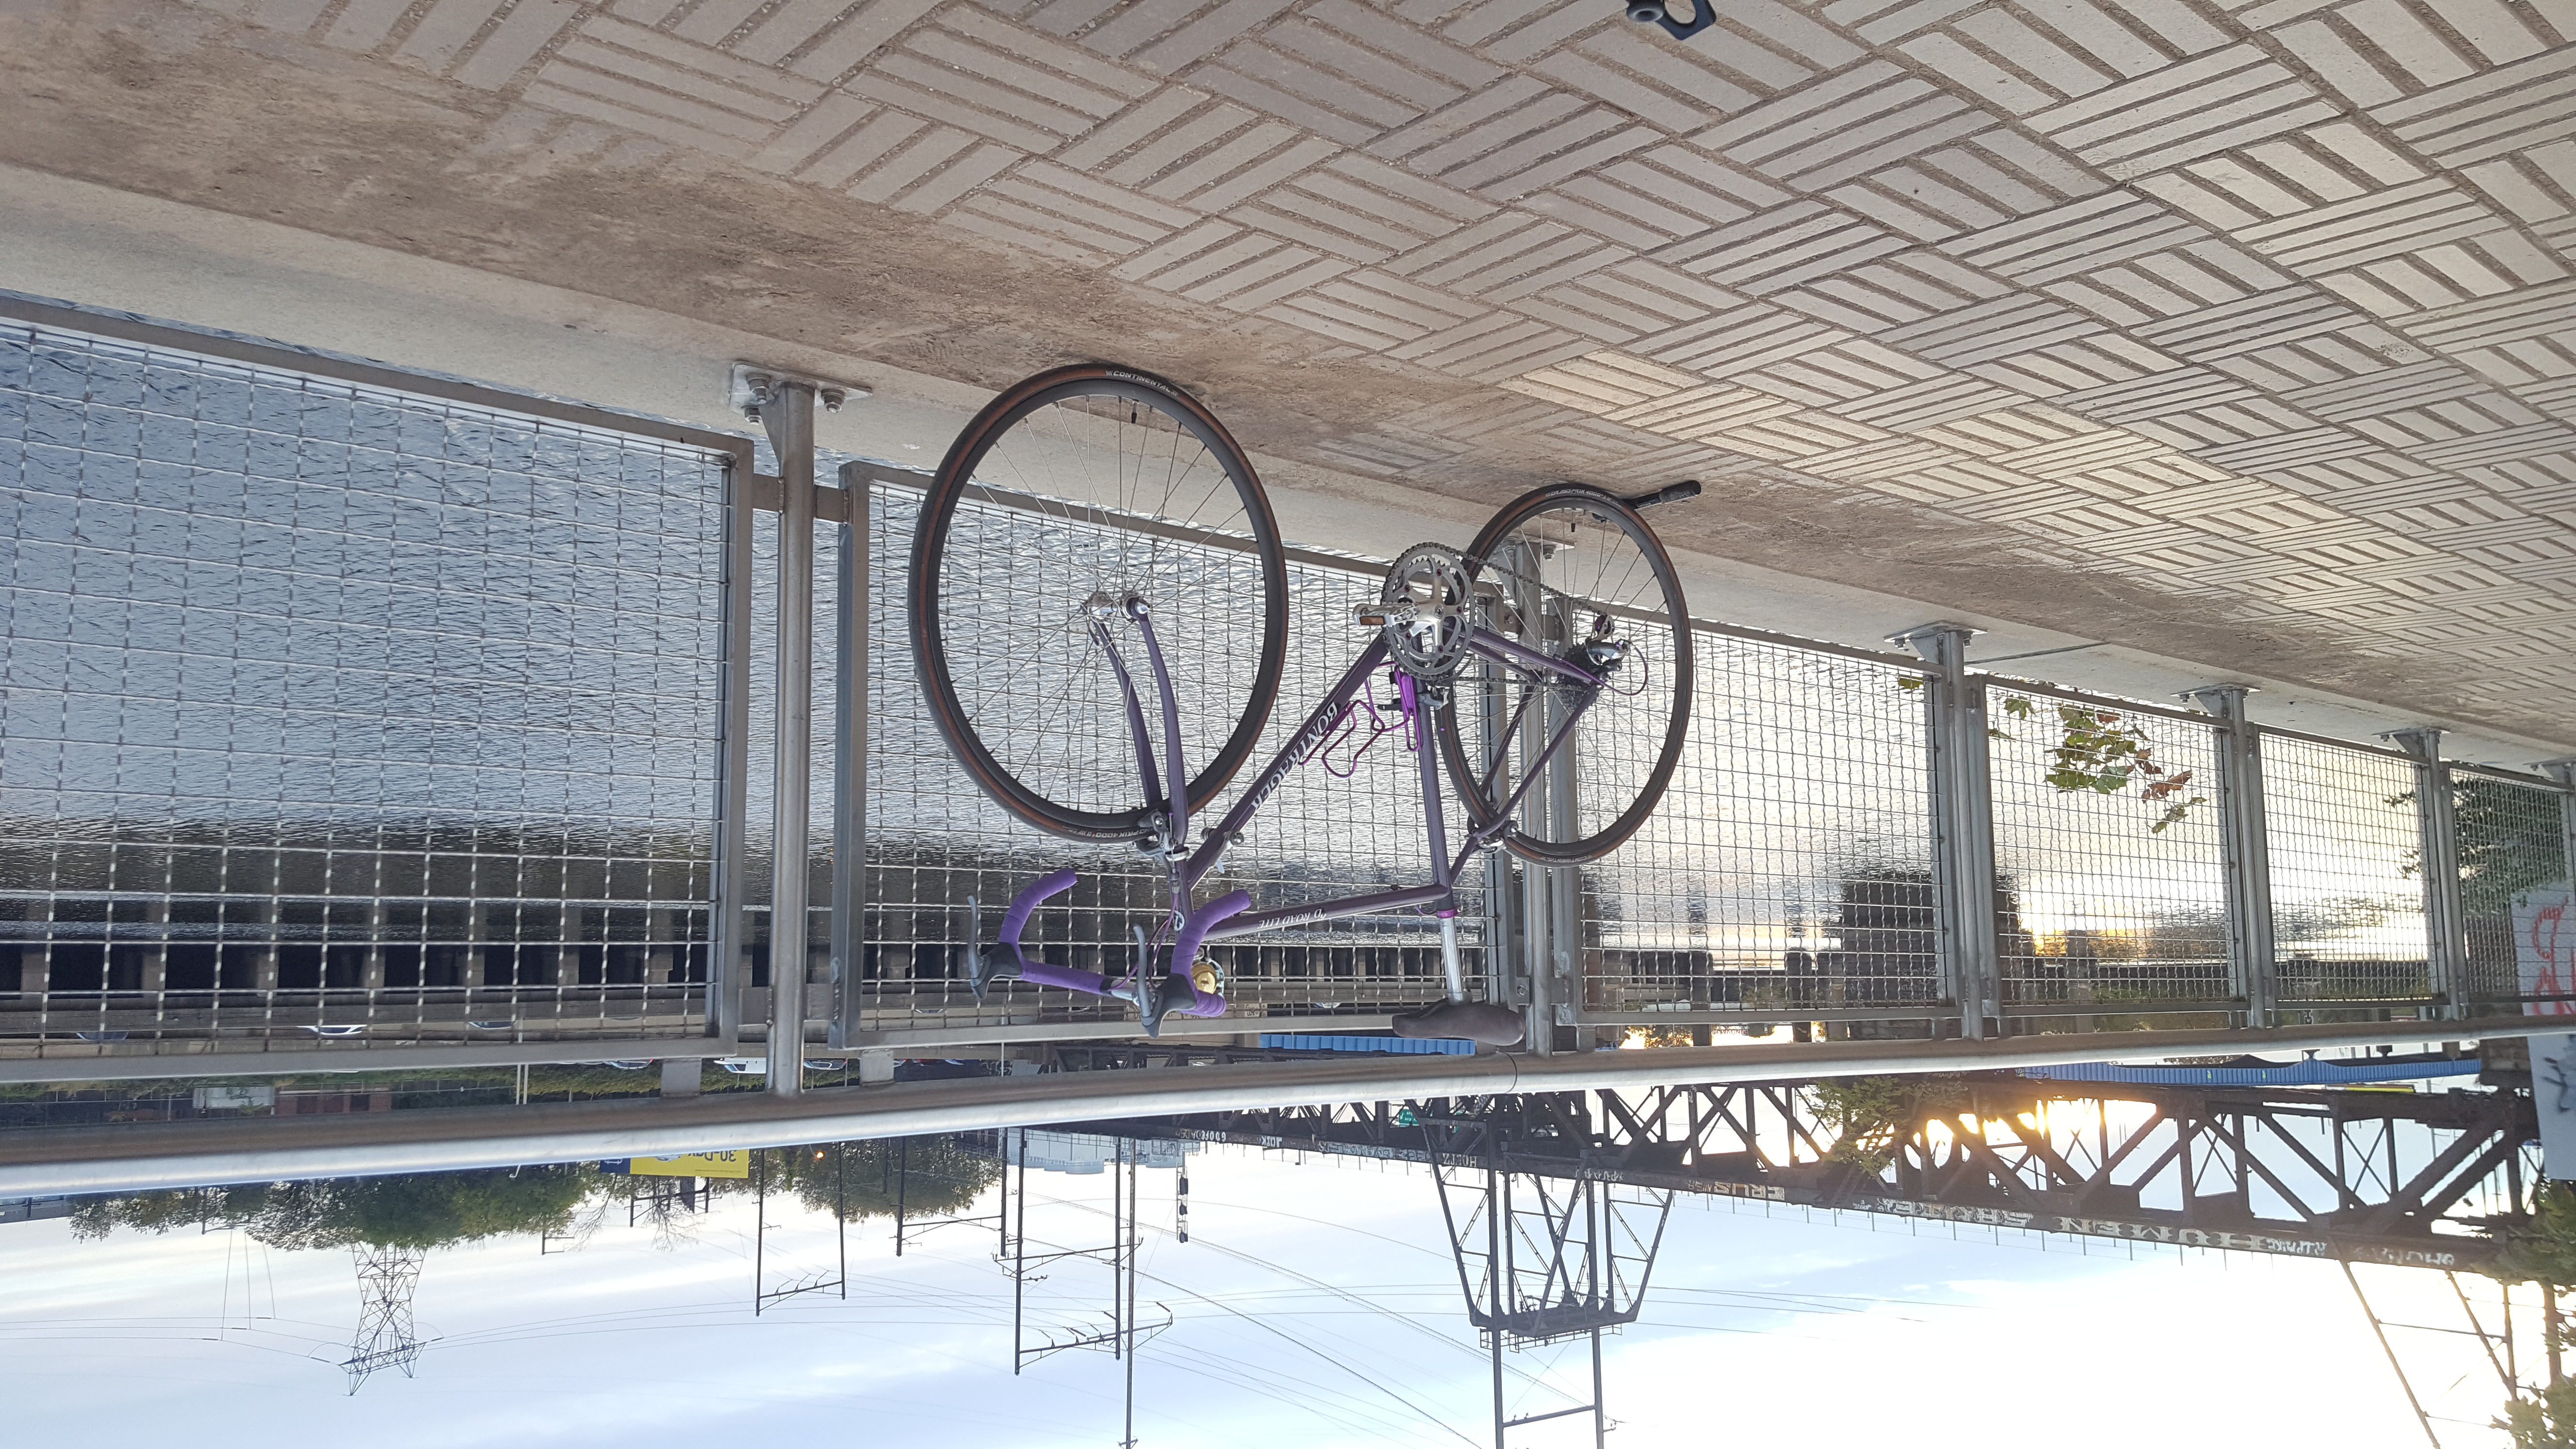 A purple bicycle posed on a fence in front of a river. A portable bike-pump can be seen under the rear tire, preventing it from rolling away. The camera has revolved around towards the front of the bike. In the background is a train bridge with the sun behind it.